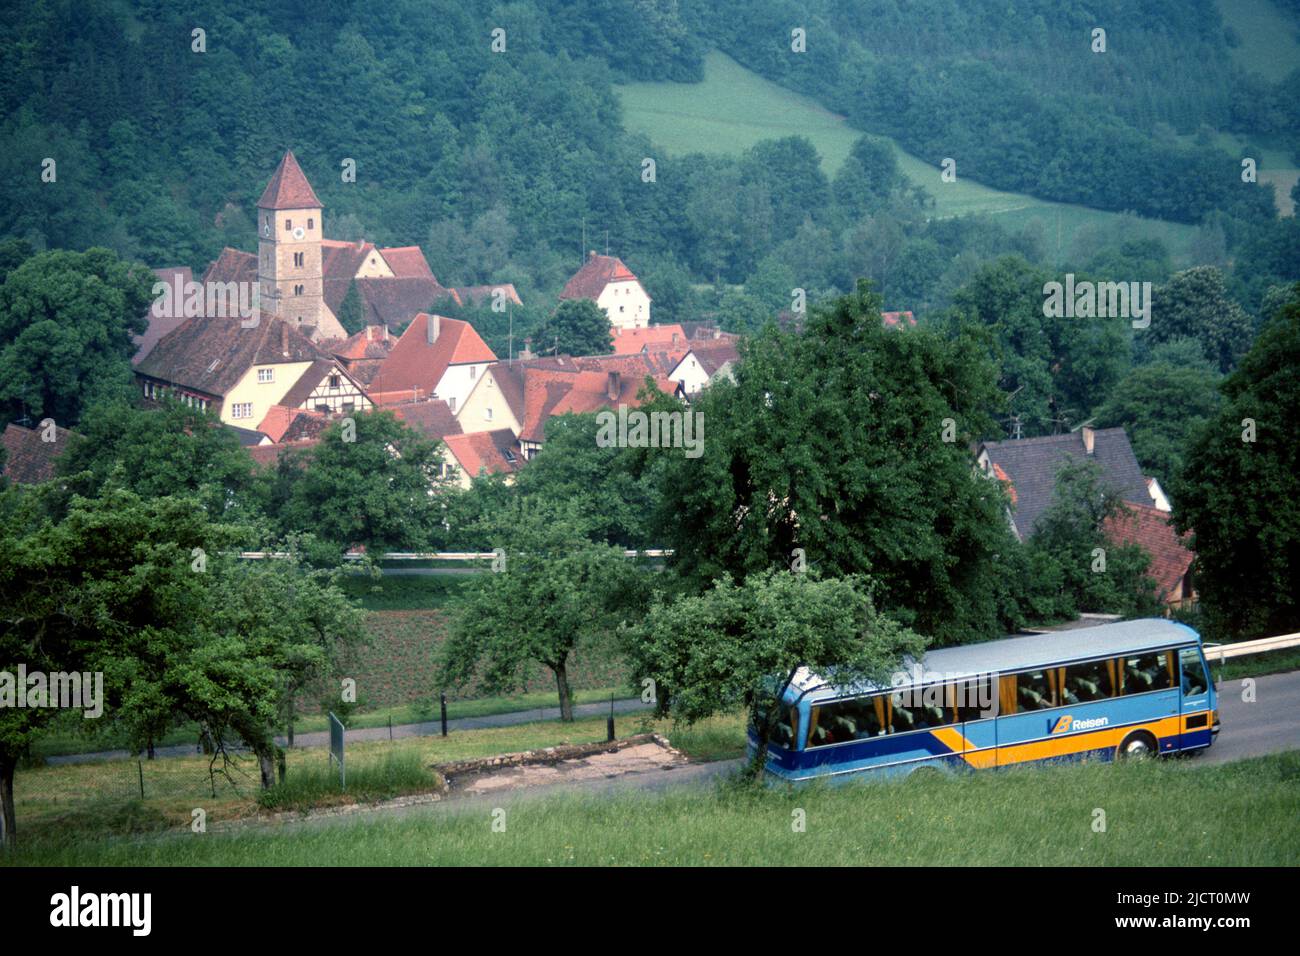 View of village from hillside with tourist coach on the road in 1982, Detwang, Rothenburg ob der Tauber, Bavaria, Germany Stock Photo